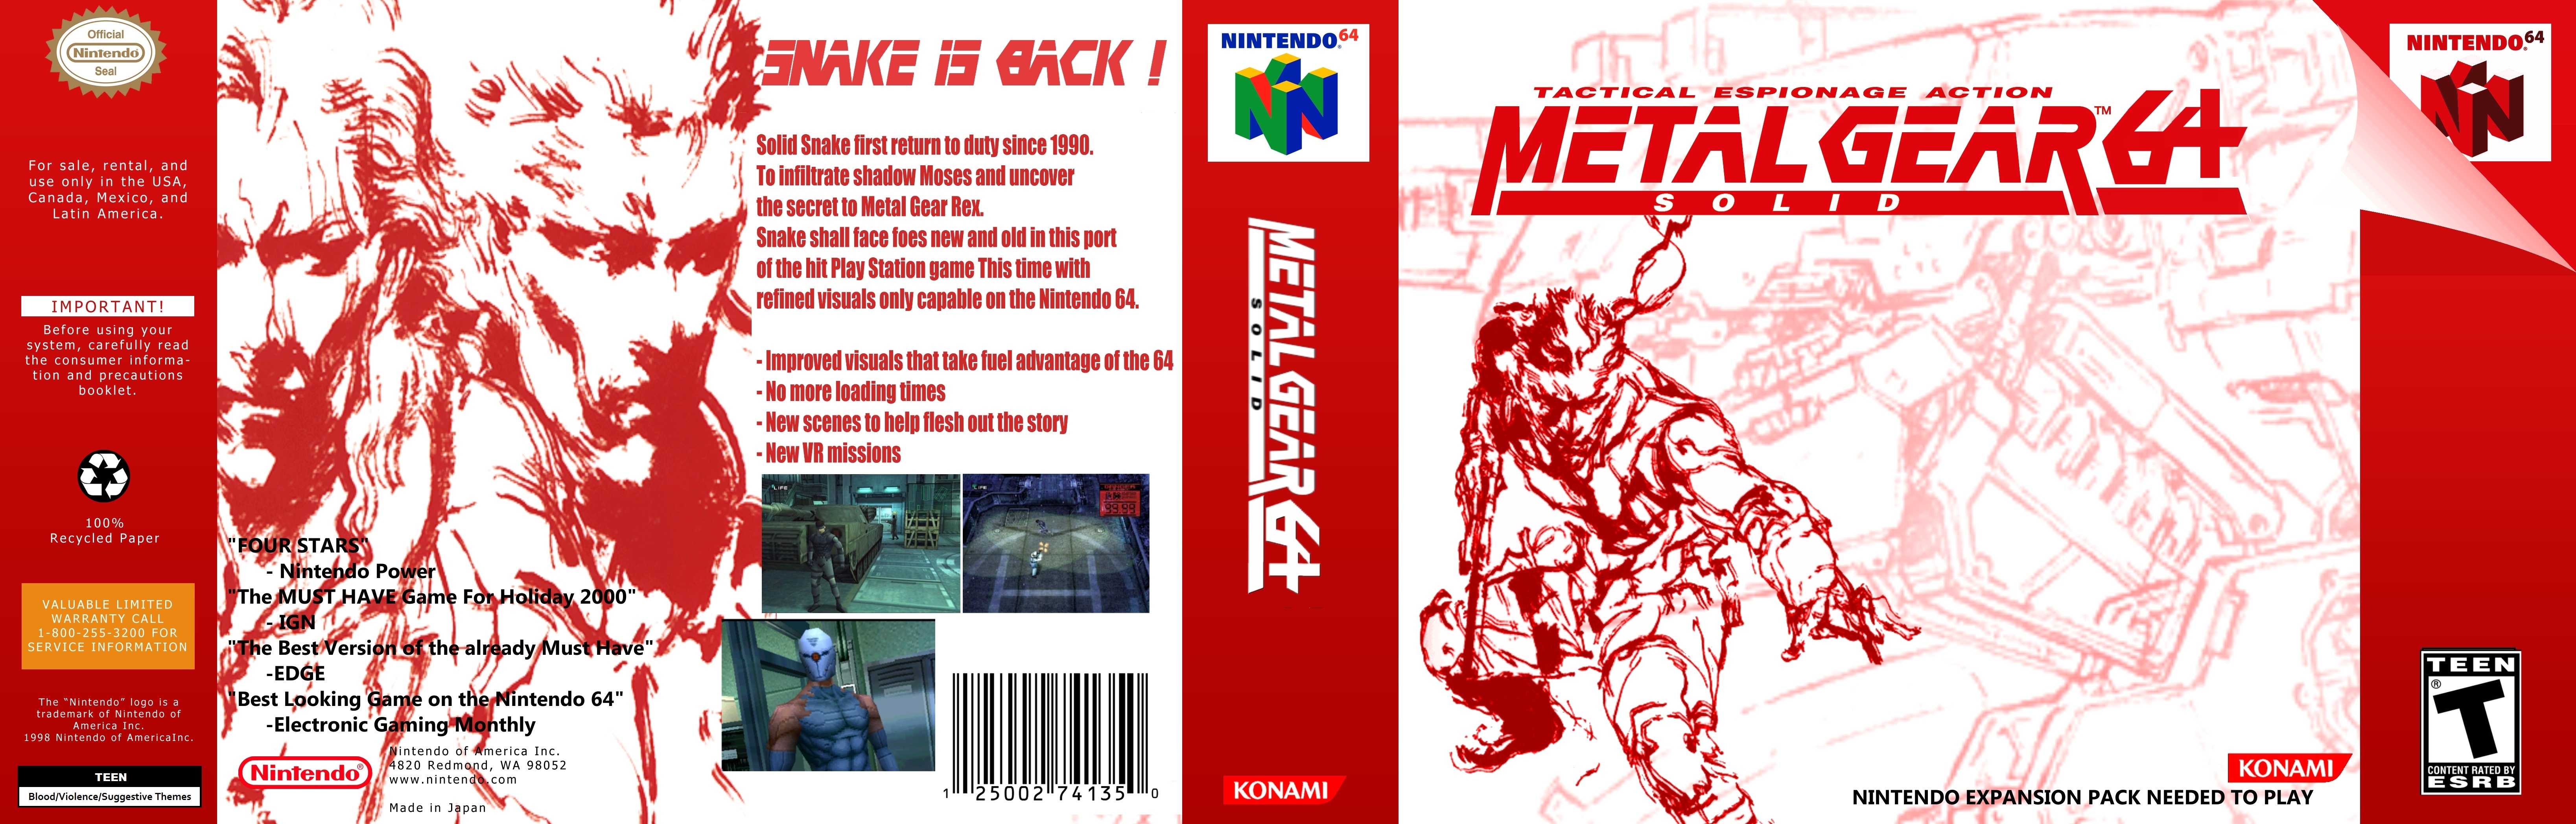 Metal Gear Solid 64 box cover